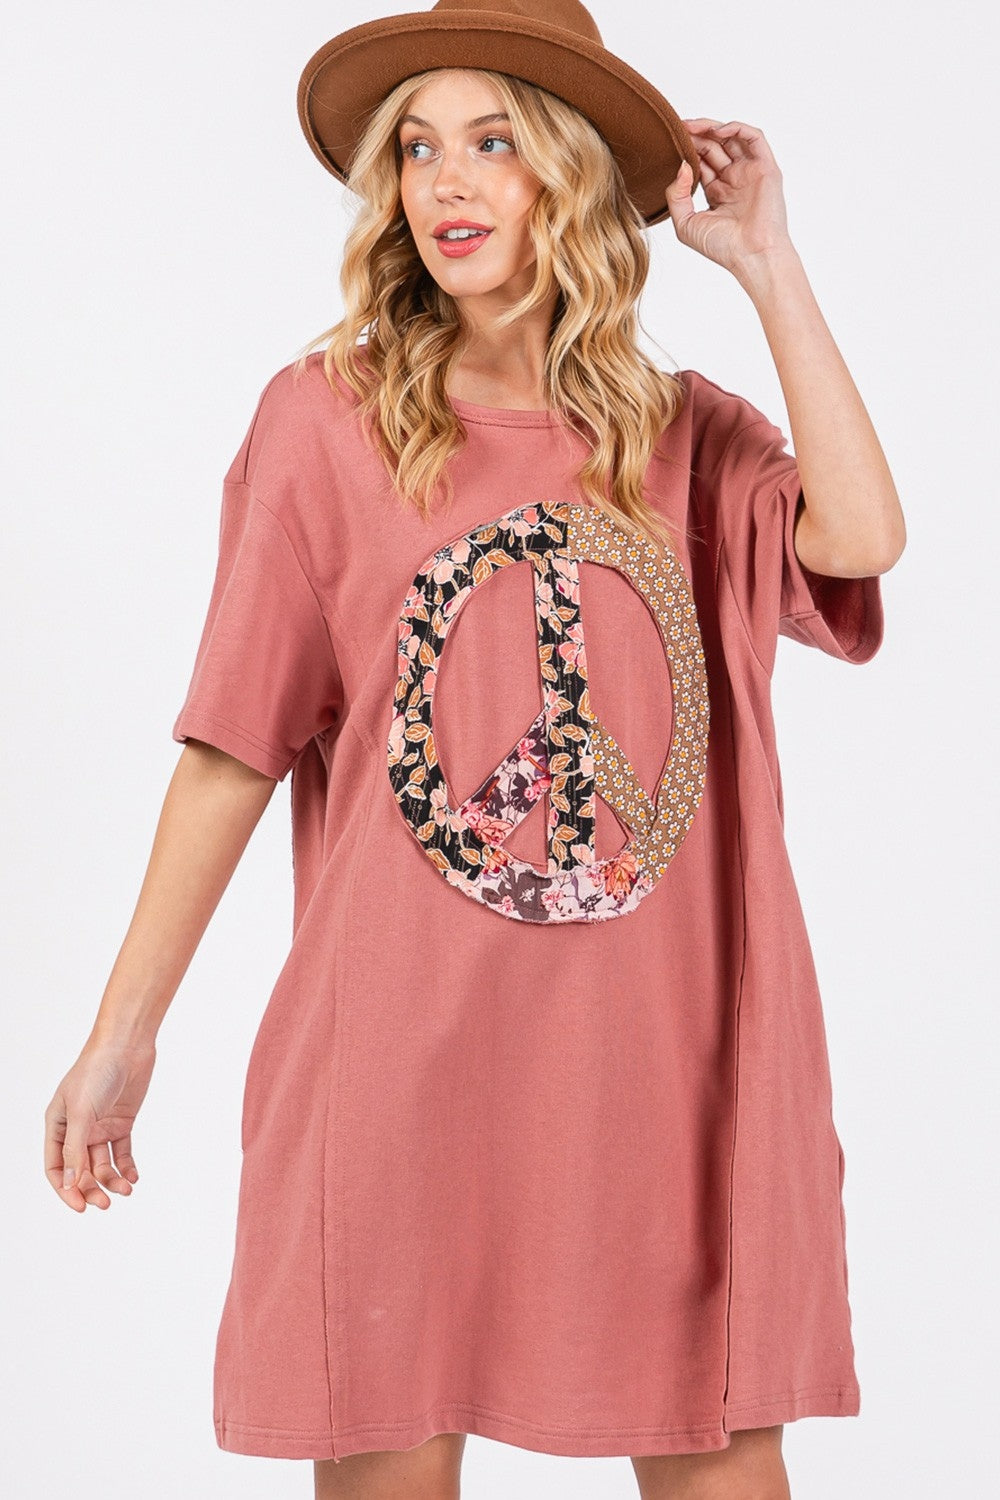 Sunset Vacation Plus Size Peace Sign Applique Short Sleeve Tee Dress Sunset and Swim   